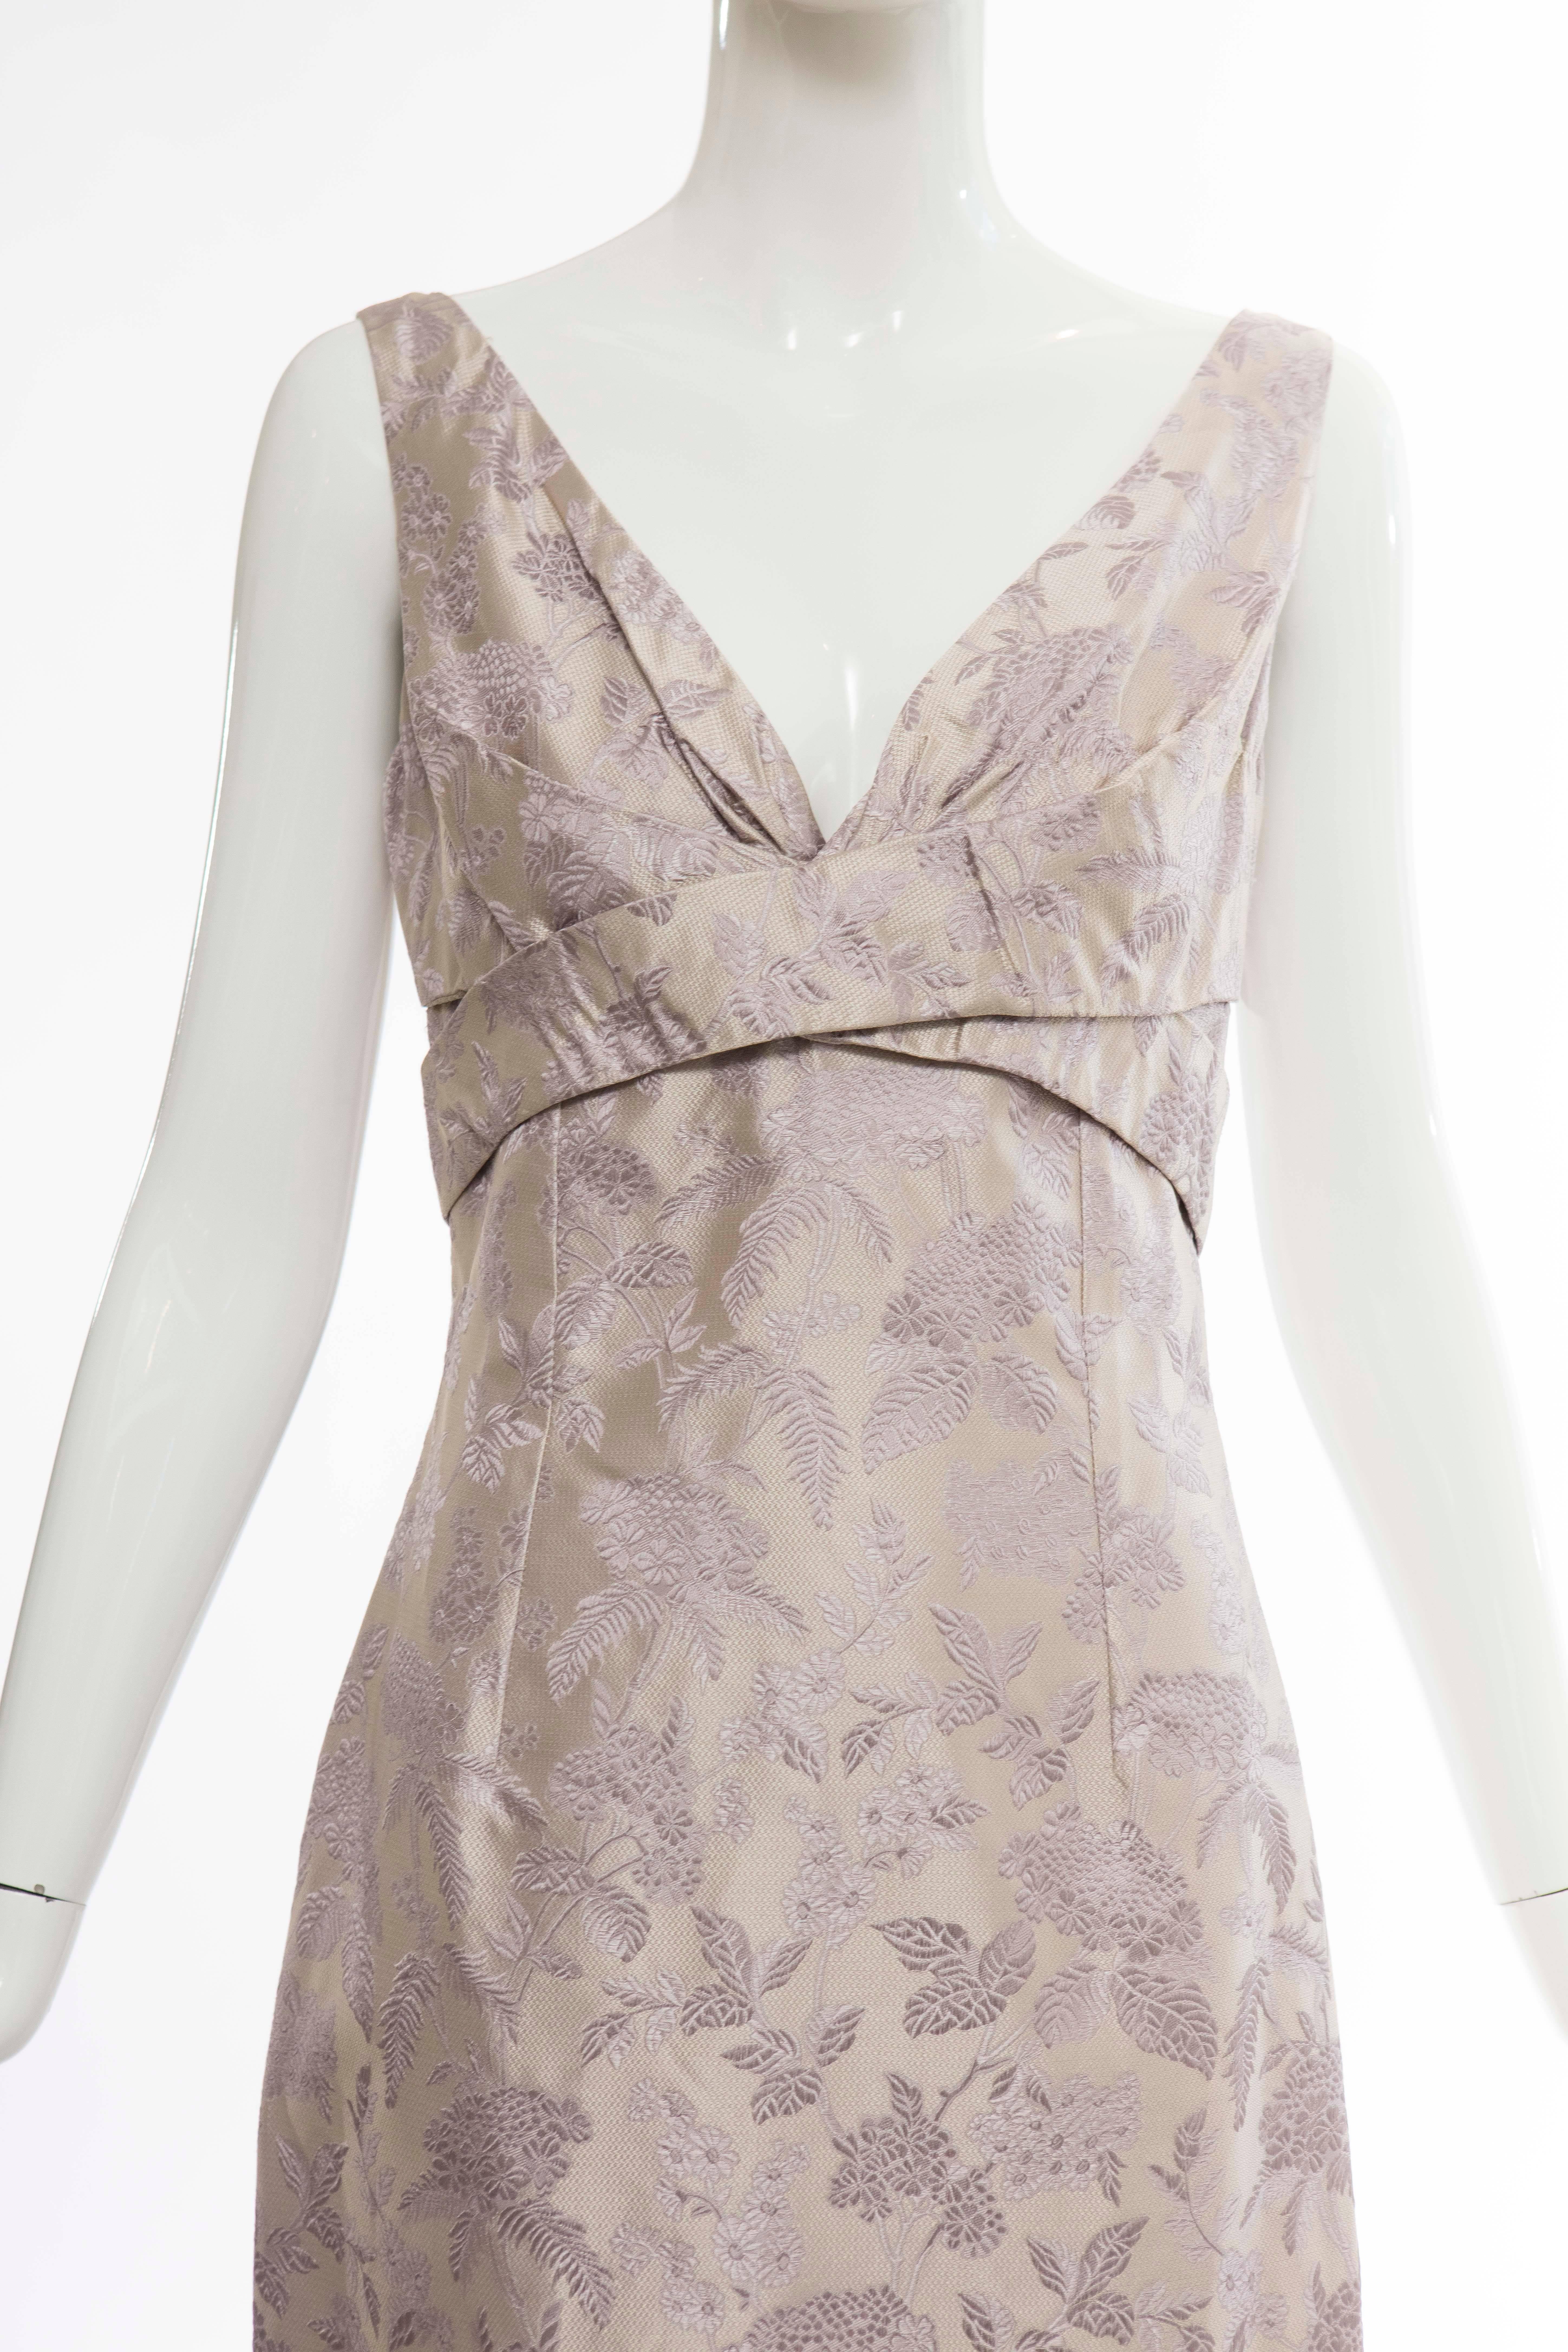 Alexander Mcqueen Sleeveless Lavender Floral Silk Jacquard Dress, Spring 2006 In New Condition For Sale In Cincinnati, OH